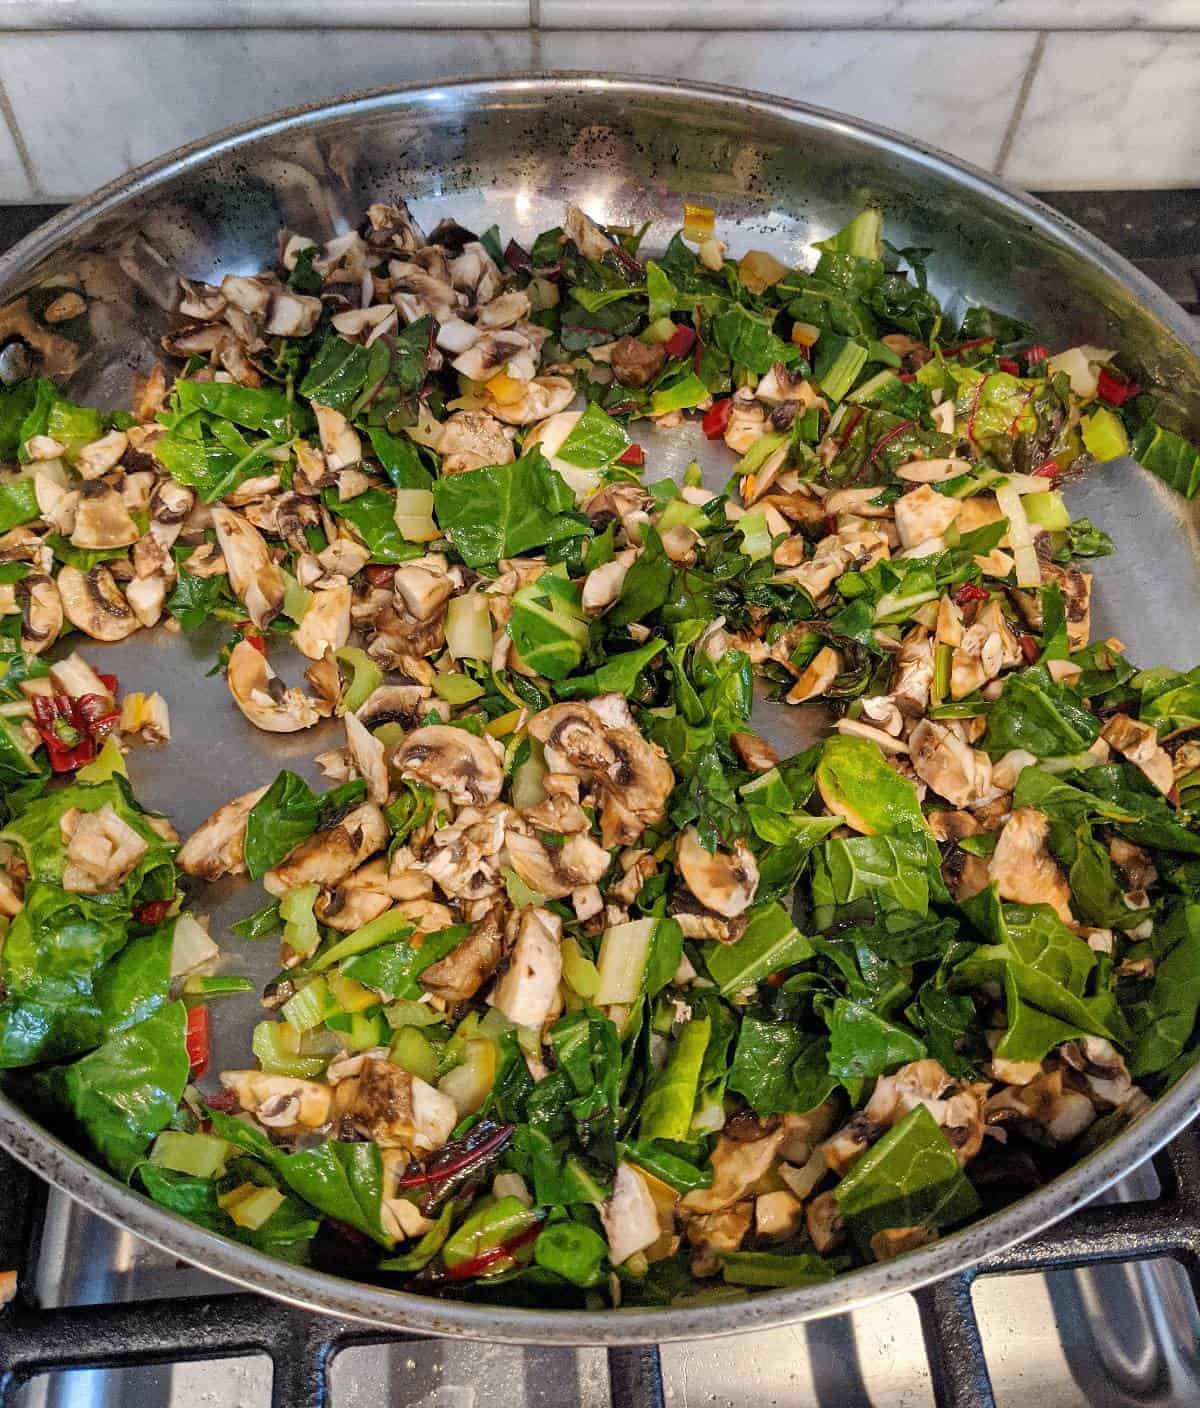 Rainbow chard and mushrooms in large pan on the stove.